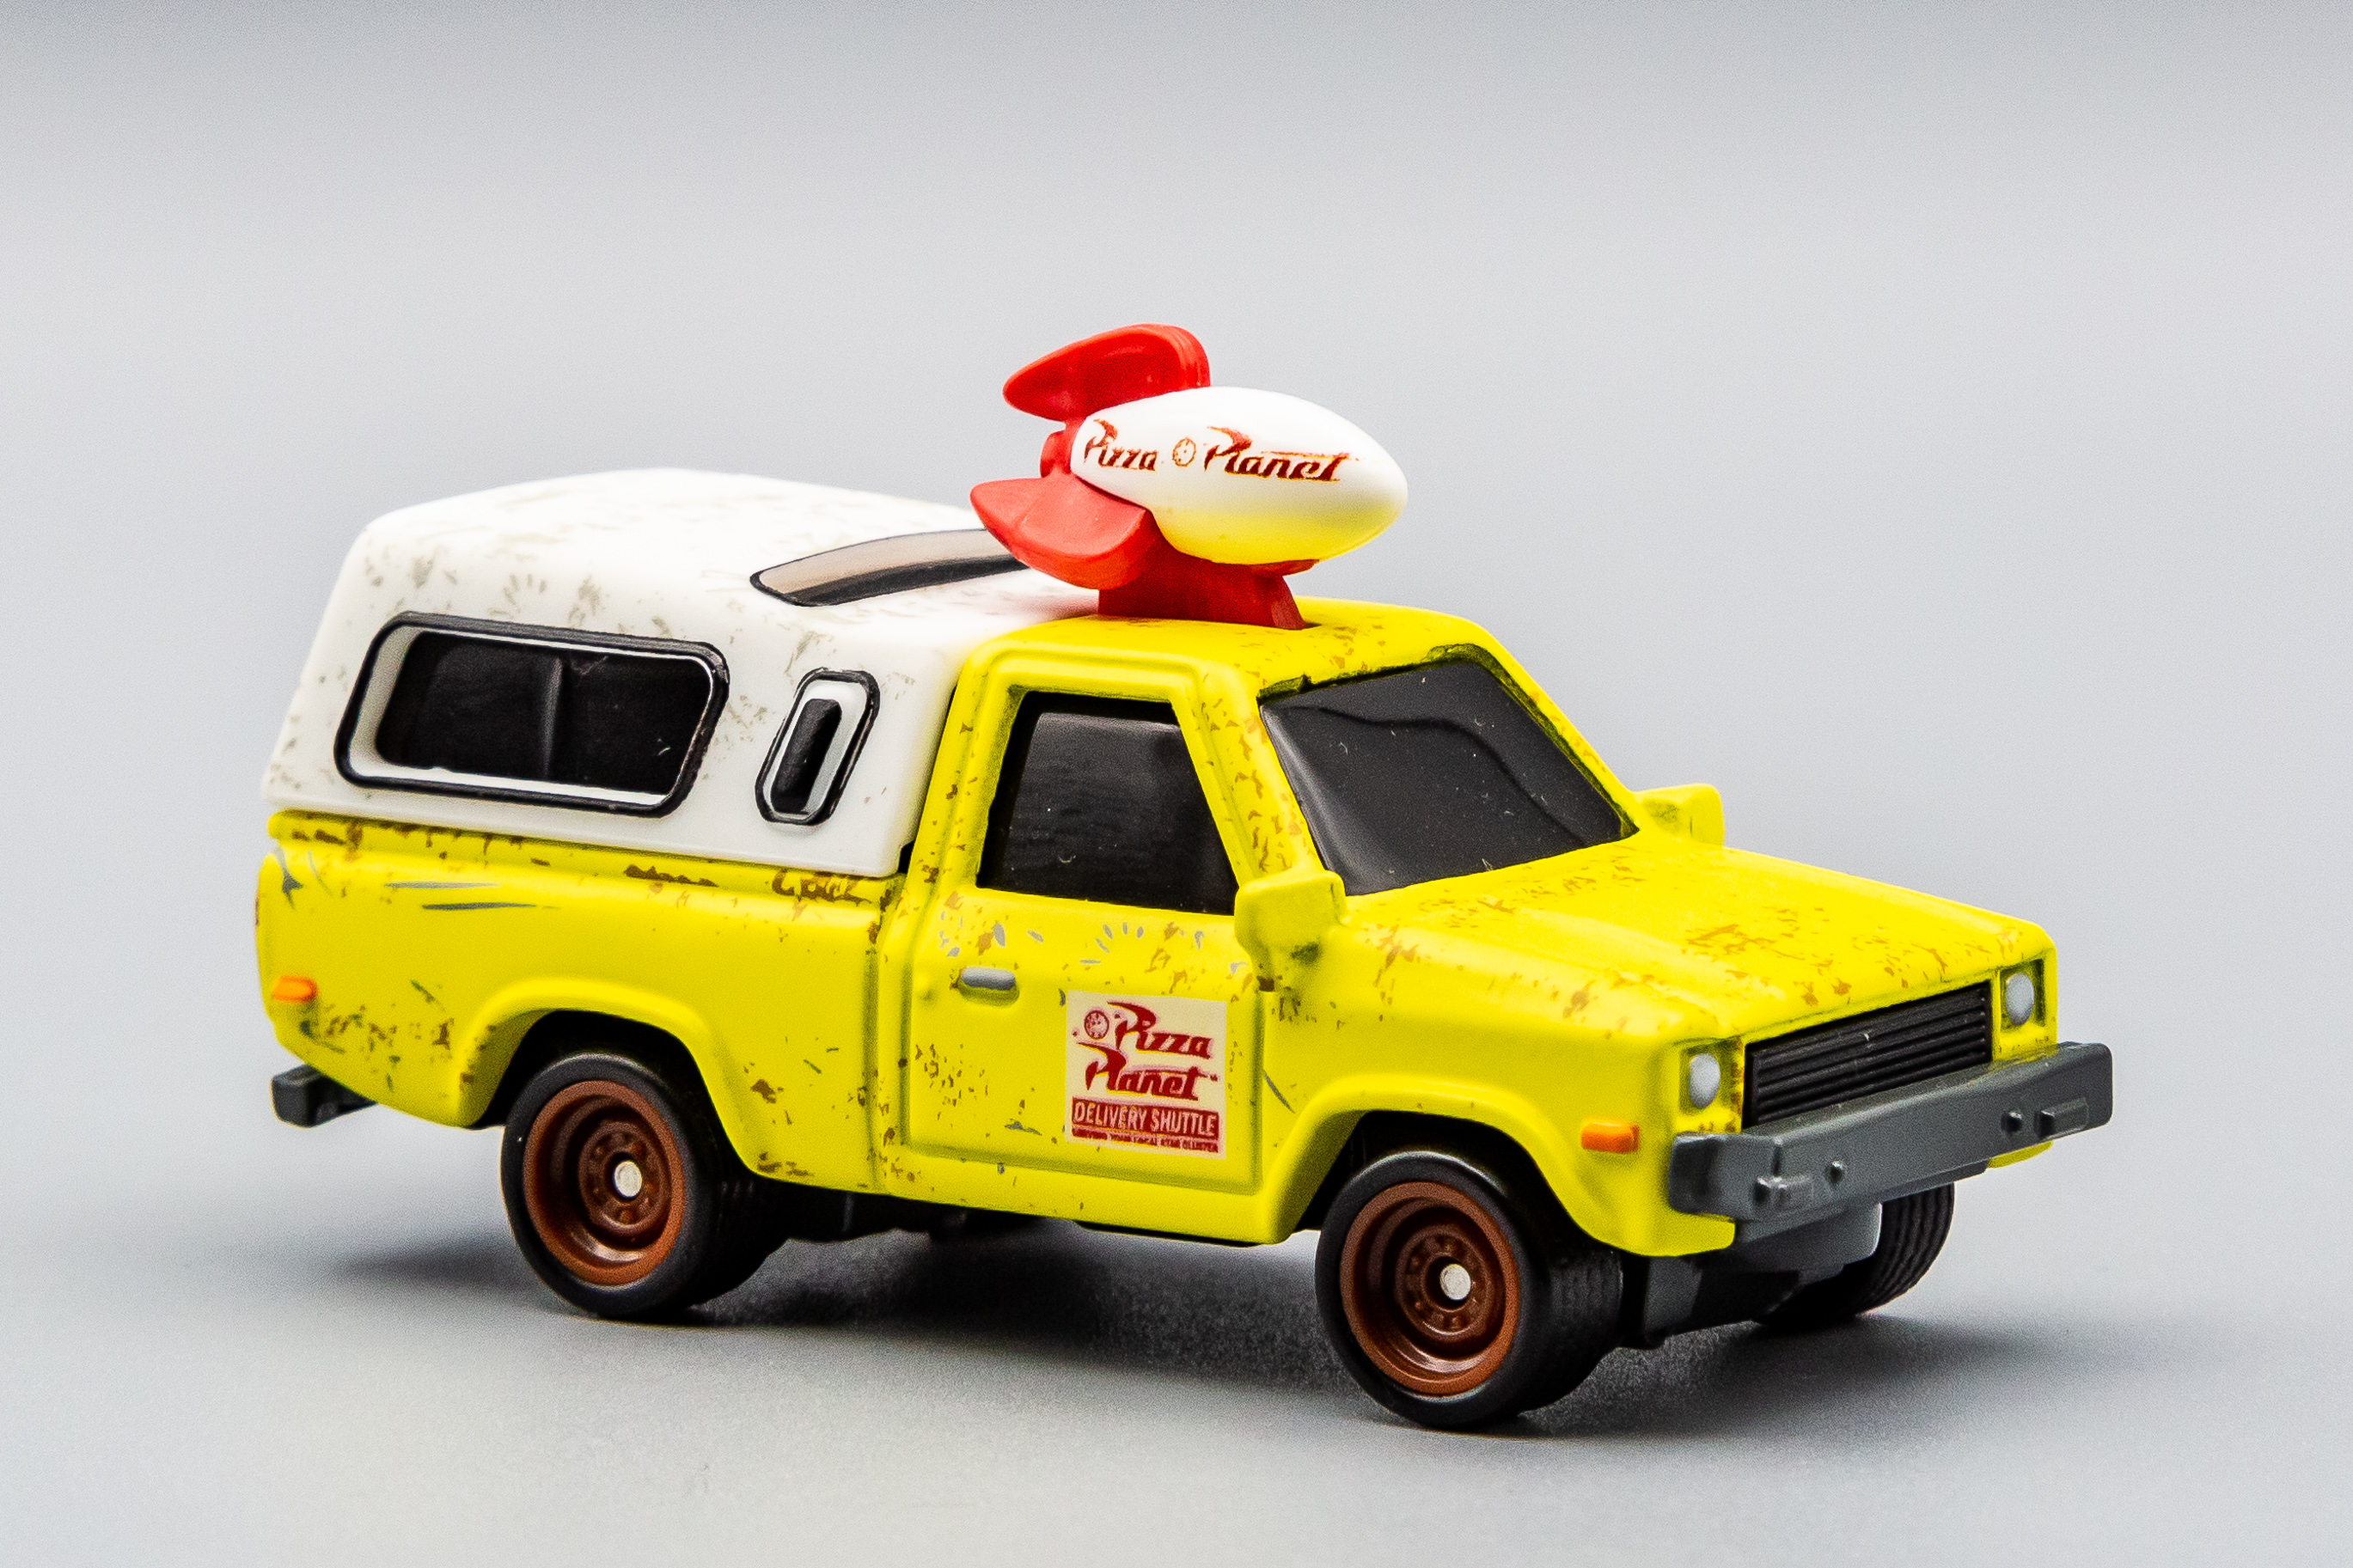 toy story hot wheels pizza planet truck